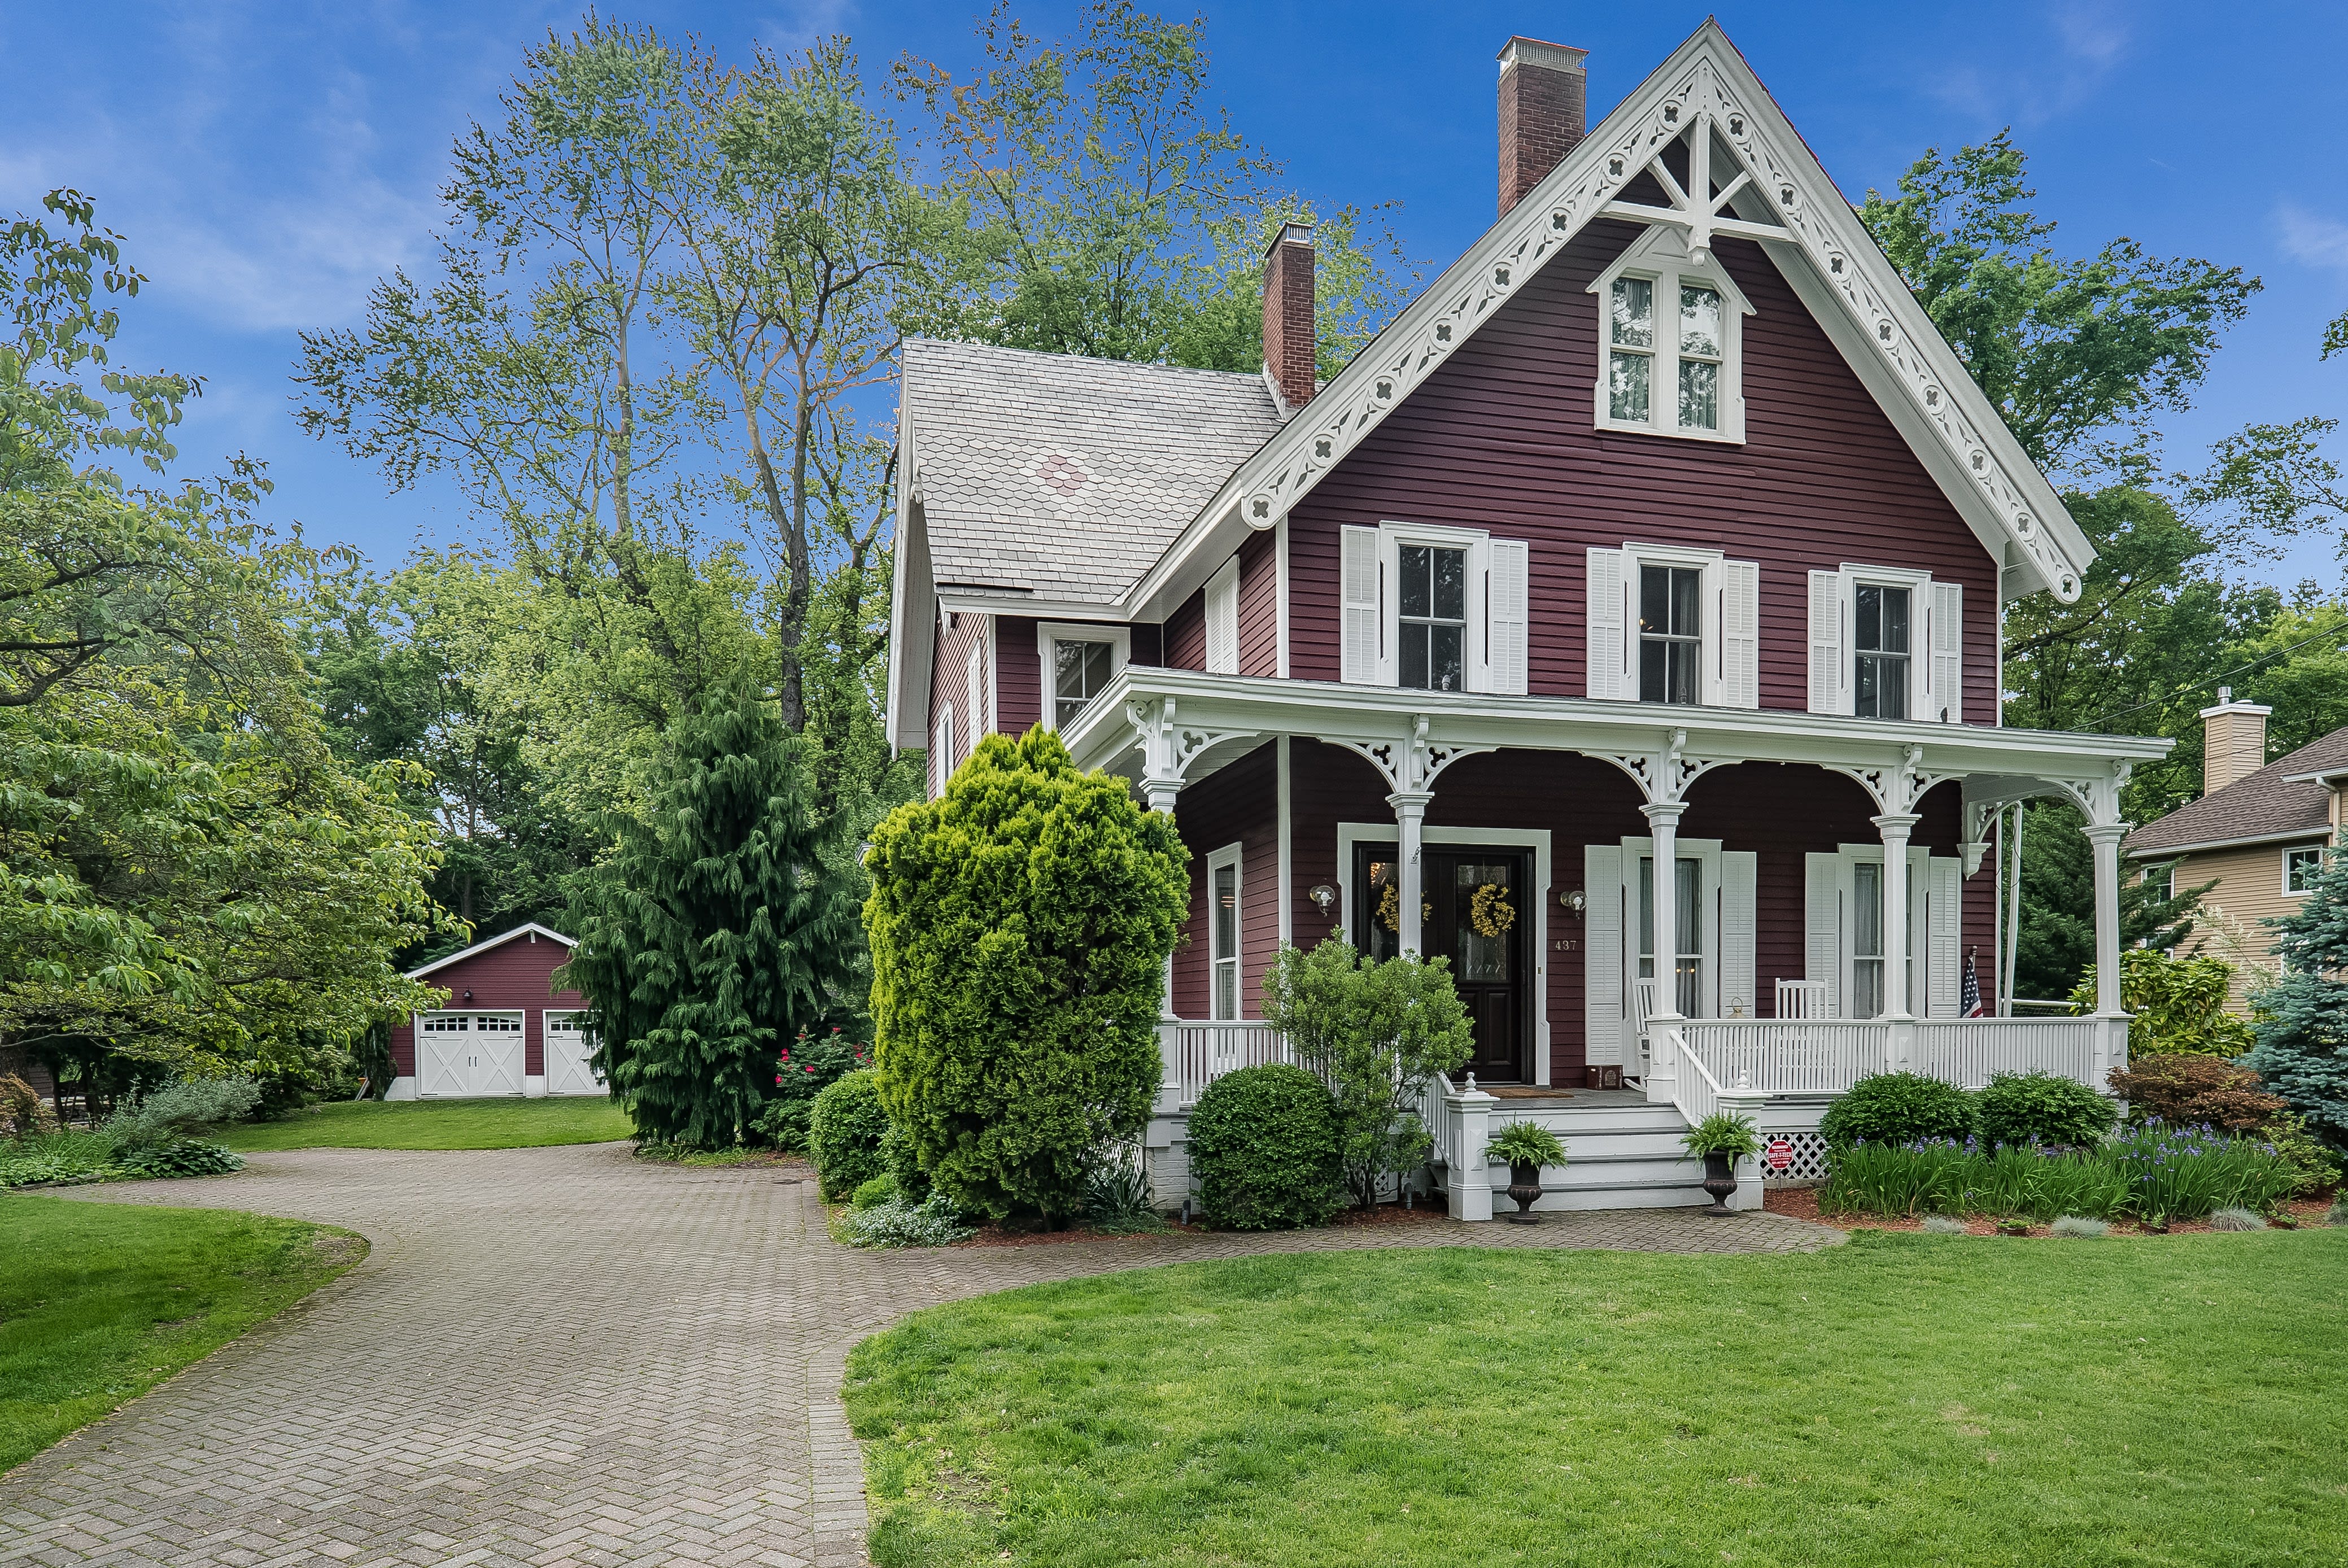 Bergen County House Sold! 437 Grove St, Oradell NJ